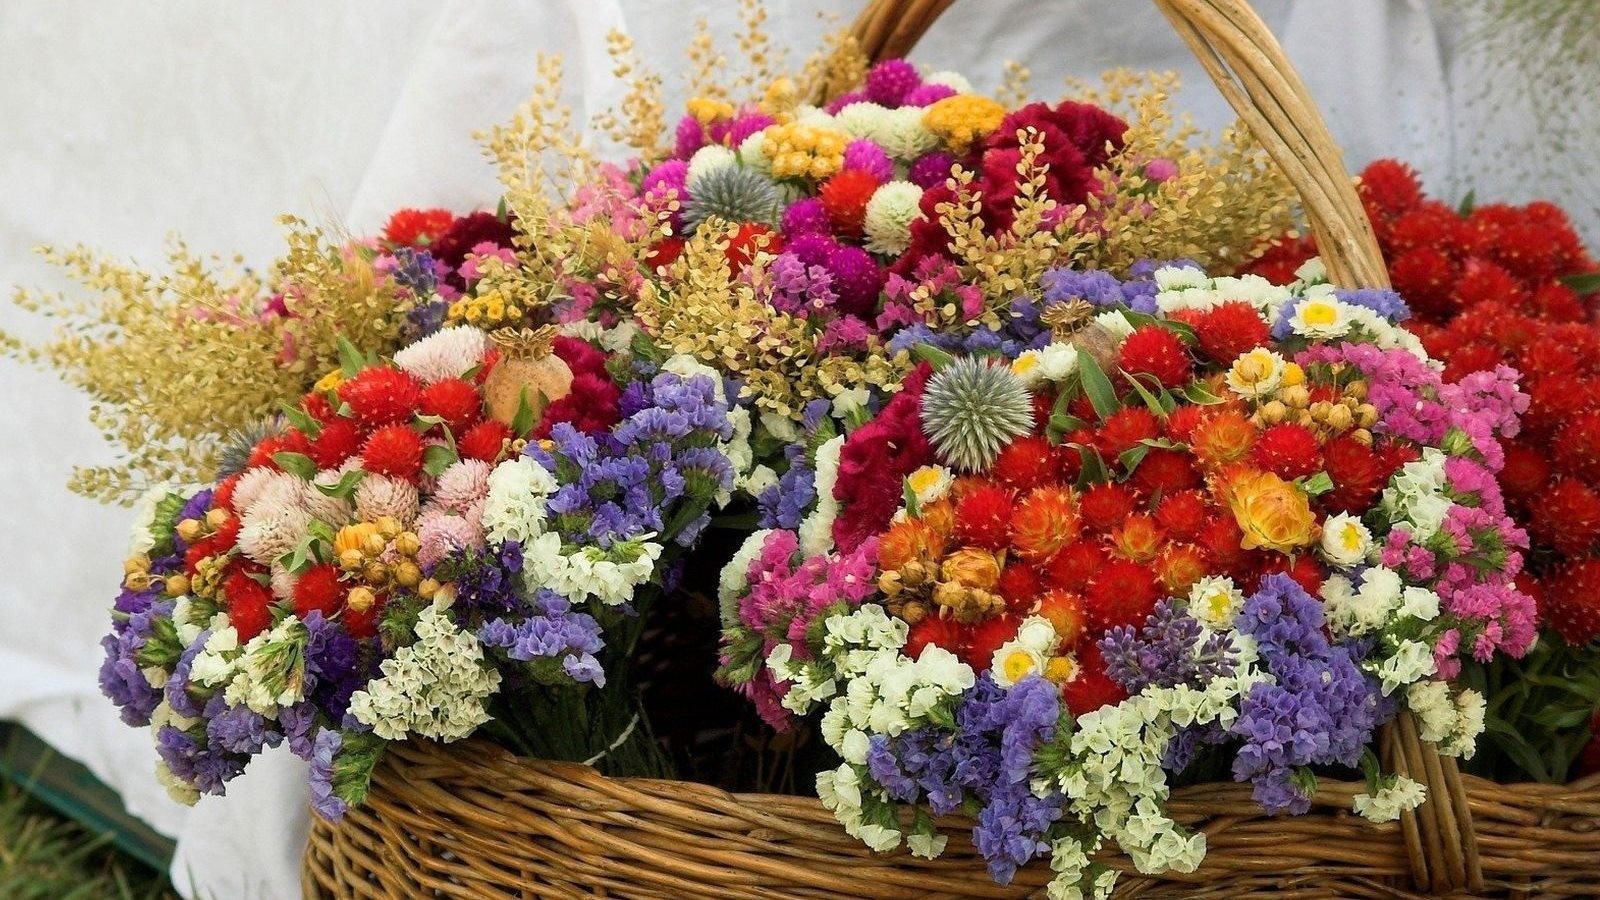 Bunch Of Flowers - DesiComments.com